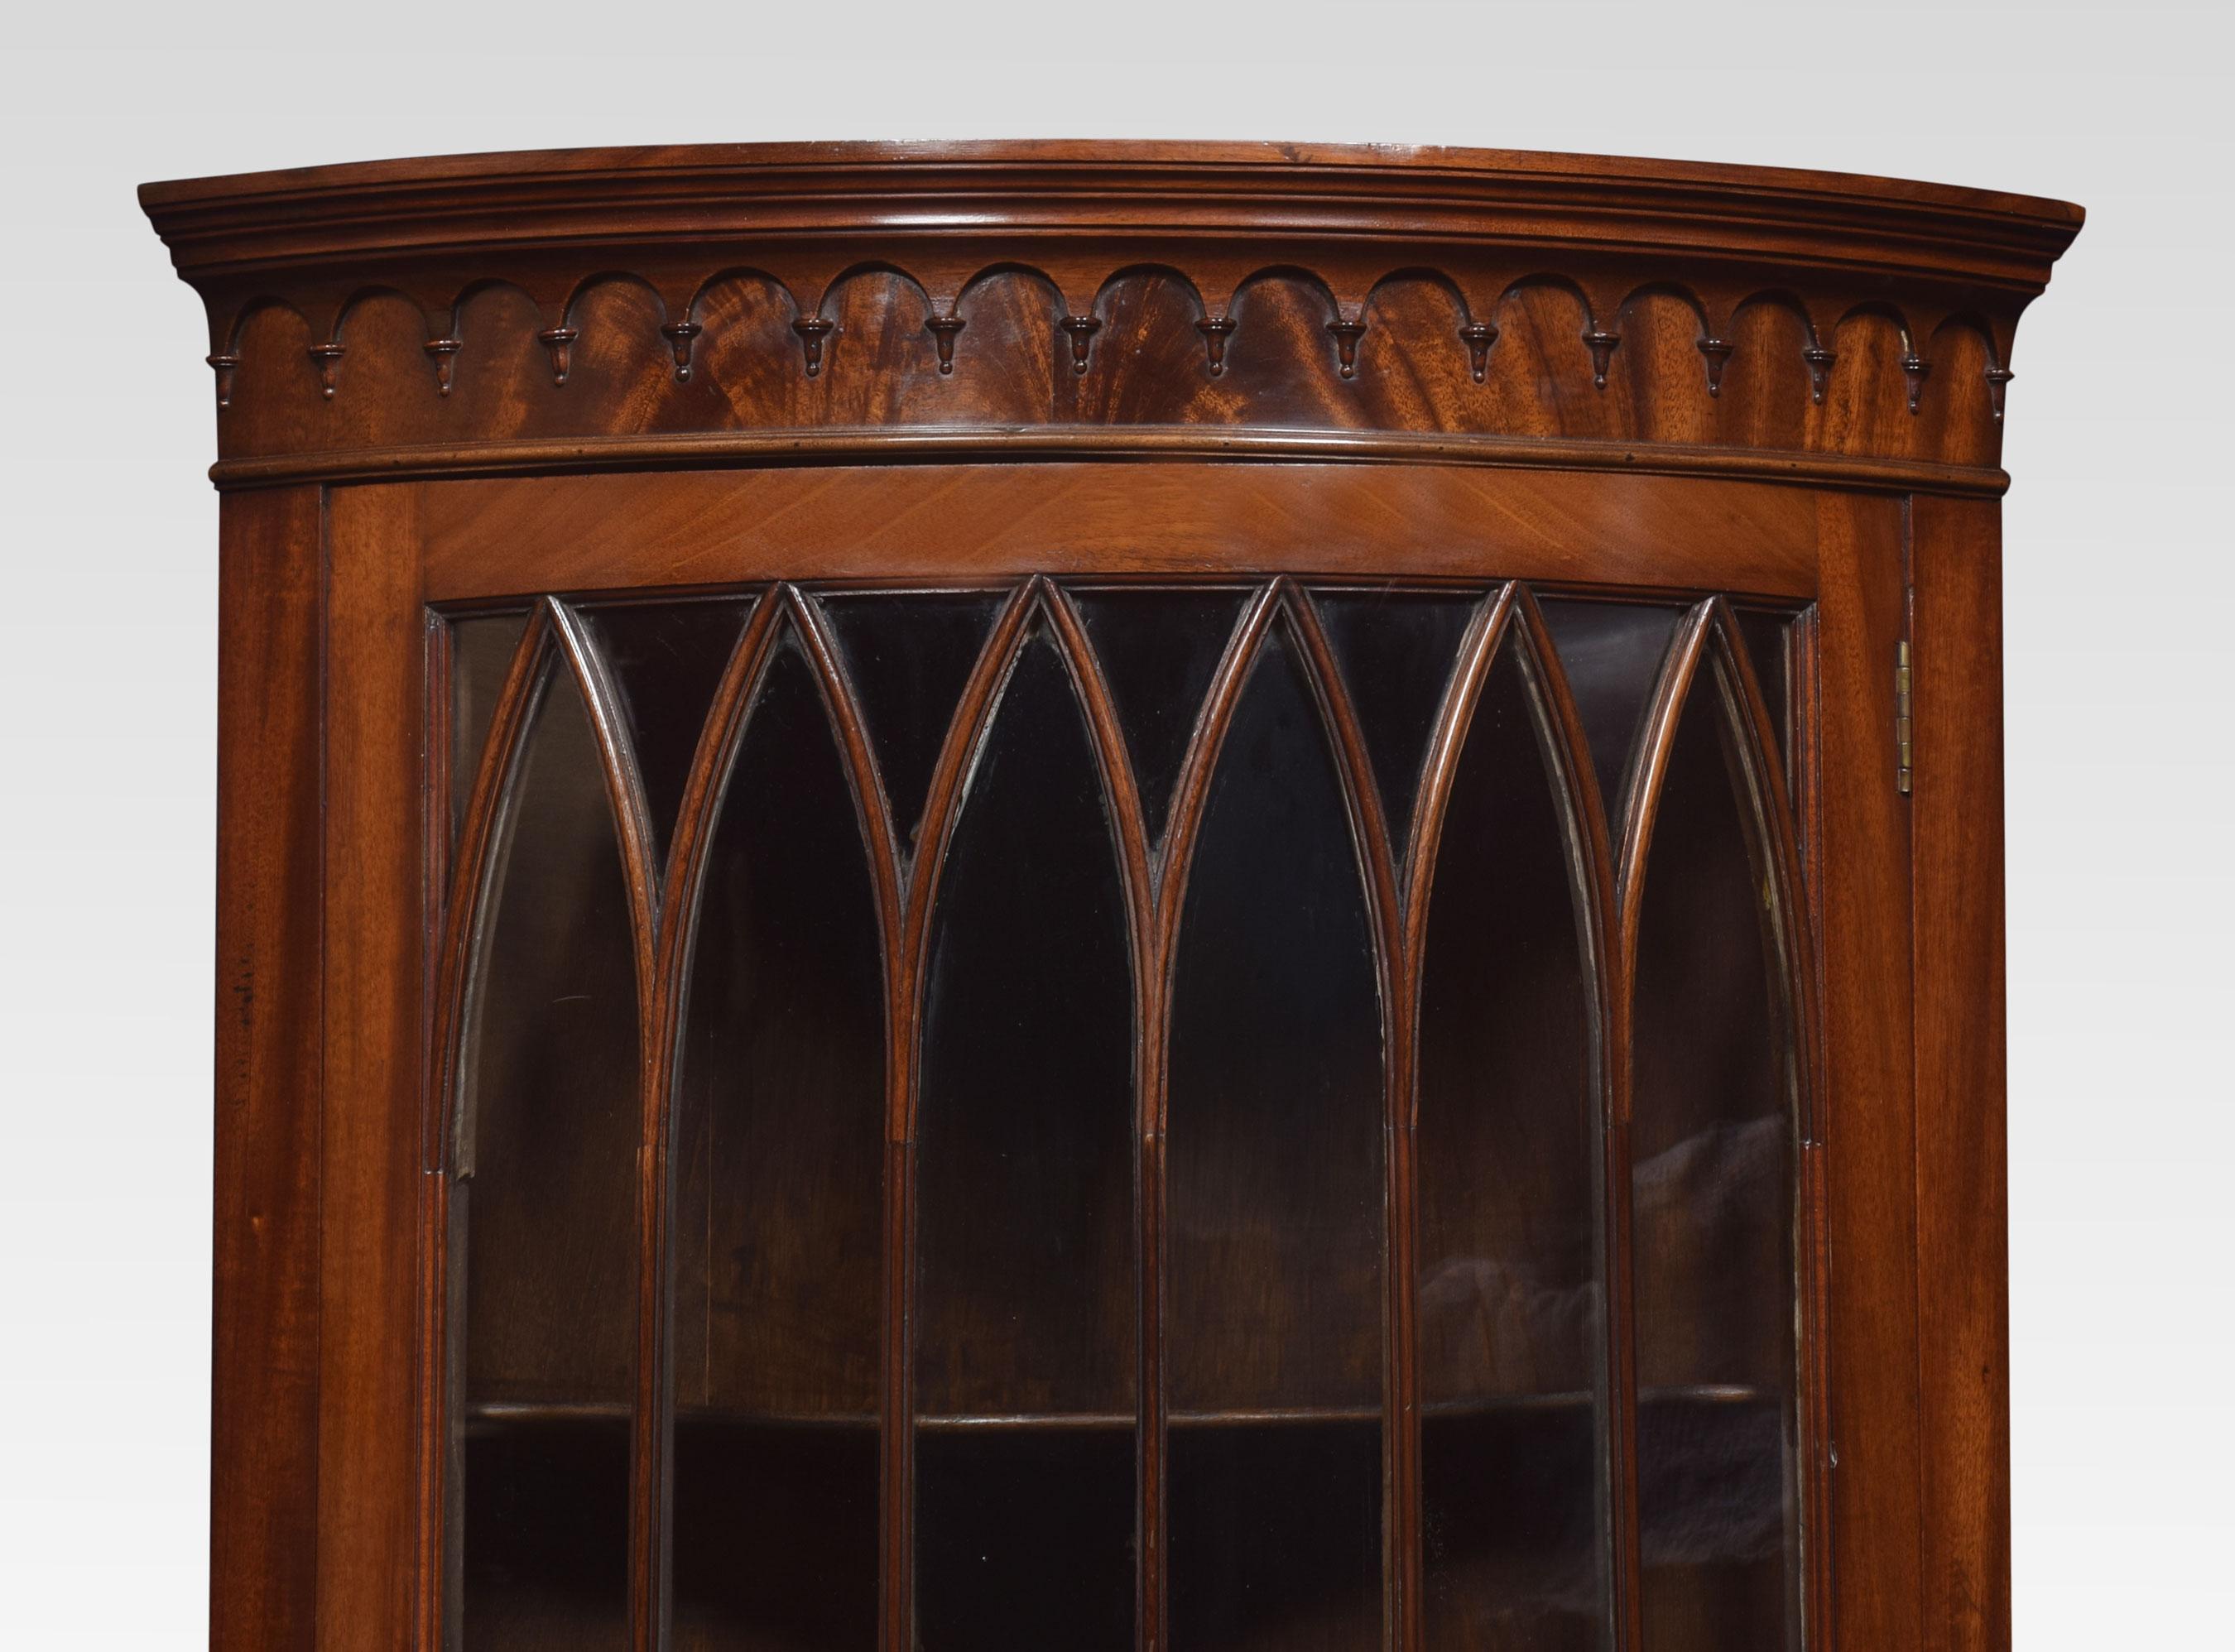 Mahogany standing bow fronted corner cabinet, the bow-fronted astragal glazed full-length door opening to reveal a shelved interior. All raised up on shaped plinth and bracket feet.
Dimensions
Height 72 inches
Width 26.5 inches
Depth 18.5 inches.